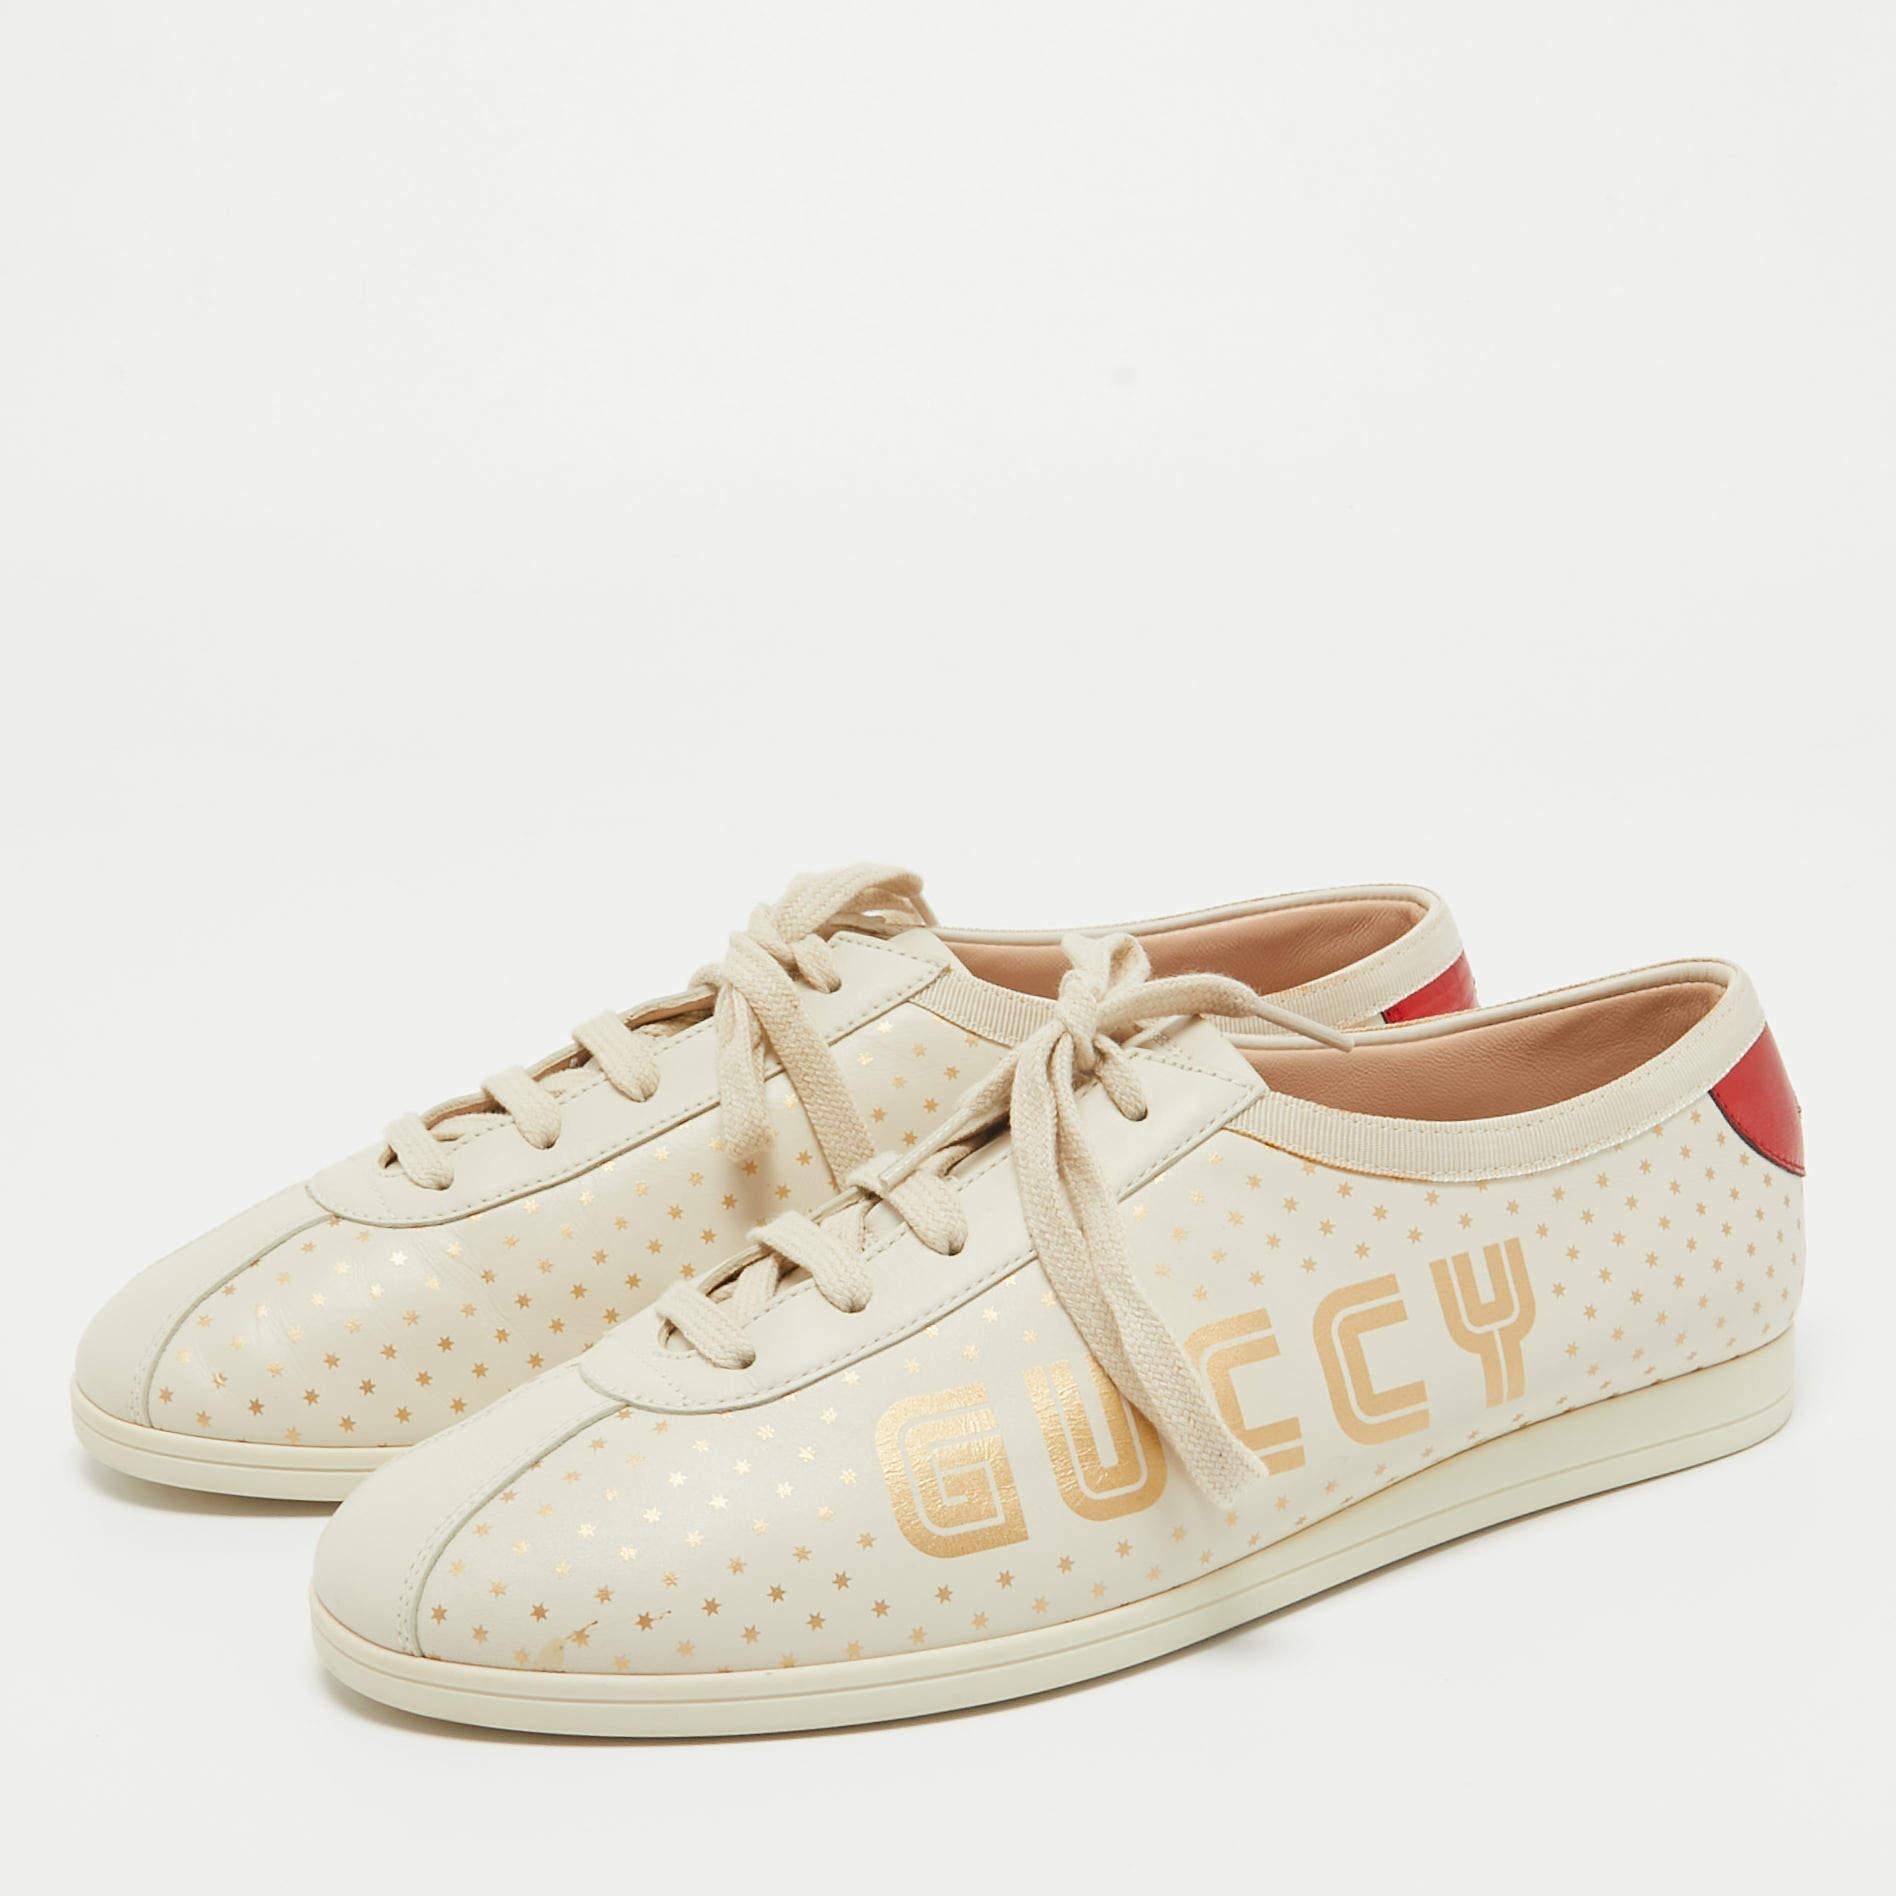 Gucci Cream Leather Falacer Low Top Sneakers Size 40 In Excellent Condition For Sale In Dubai, Al Qouz 2